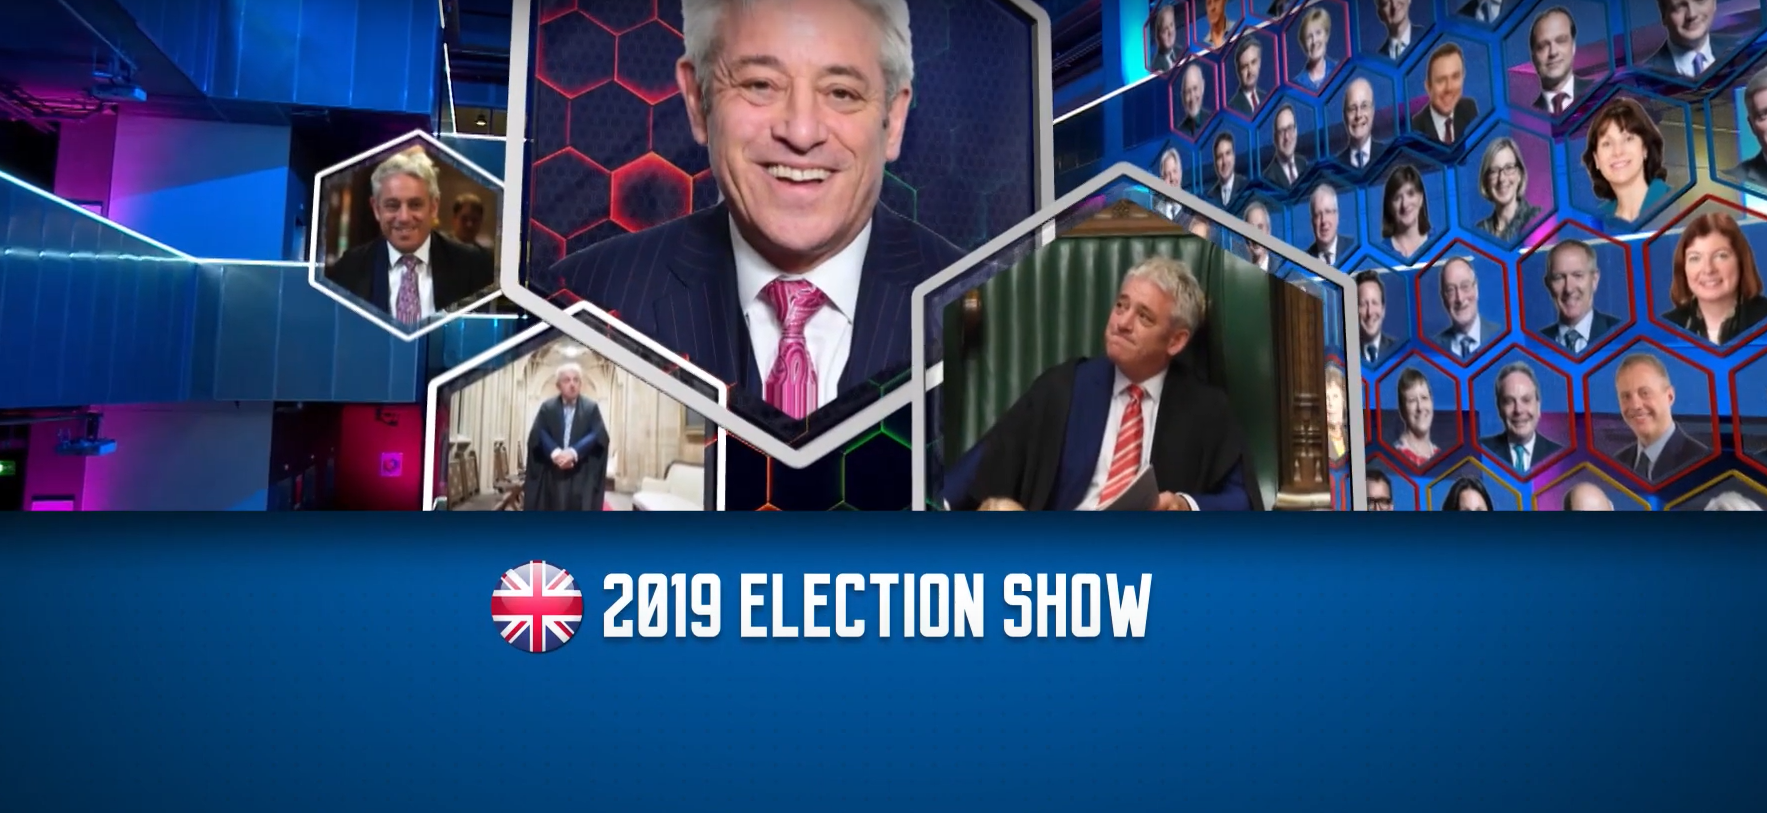 2019-election-show